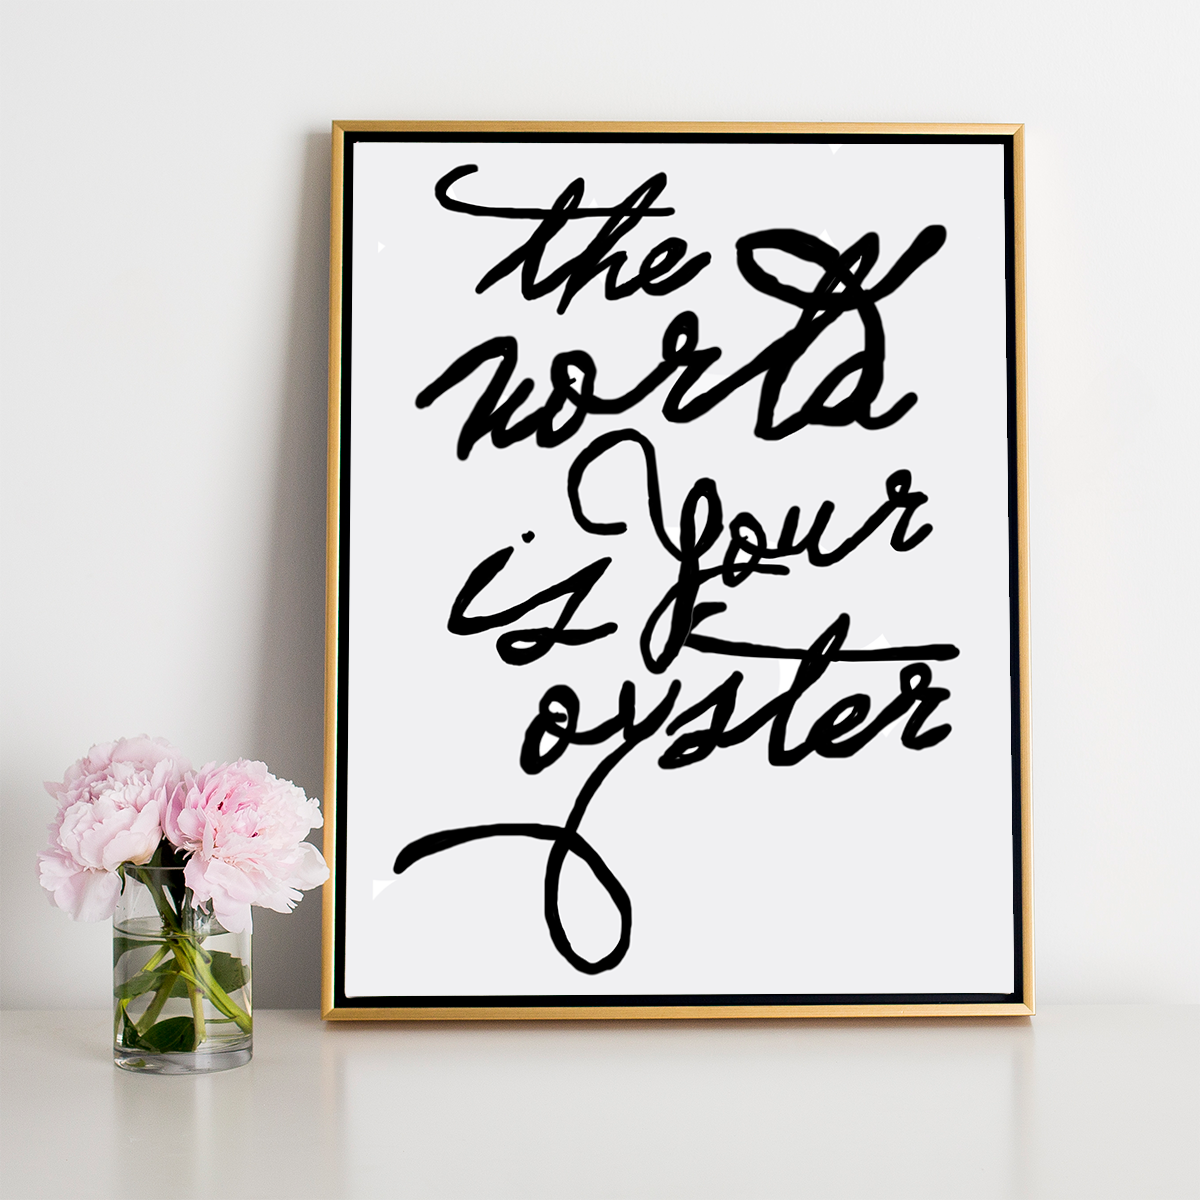 Canvas 8x10 / Canvas Only The World Is Your Oyster Handwritten Canvas dombezalergii